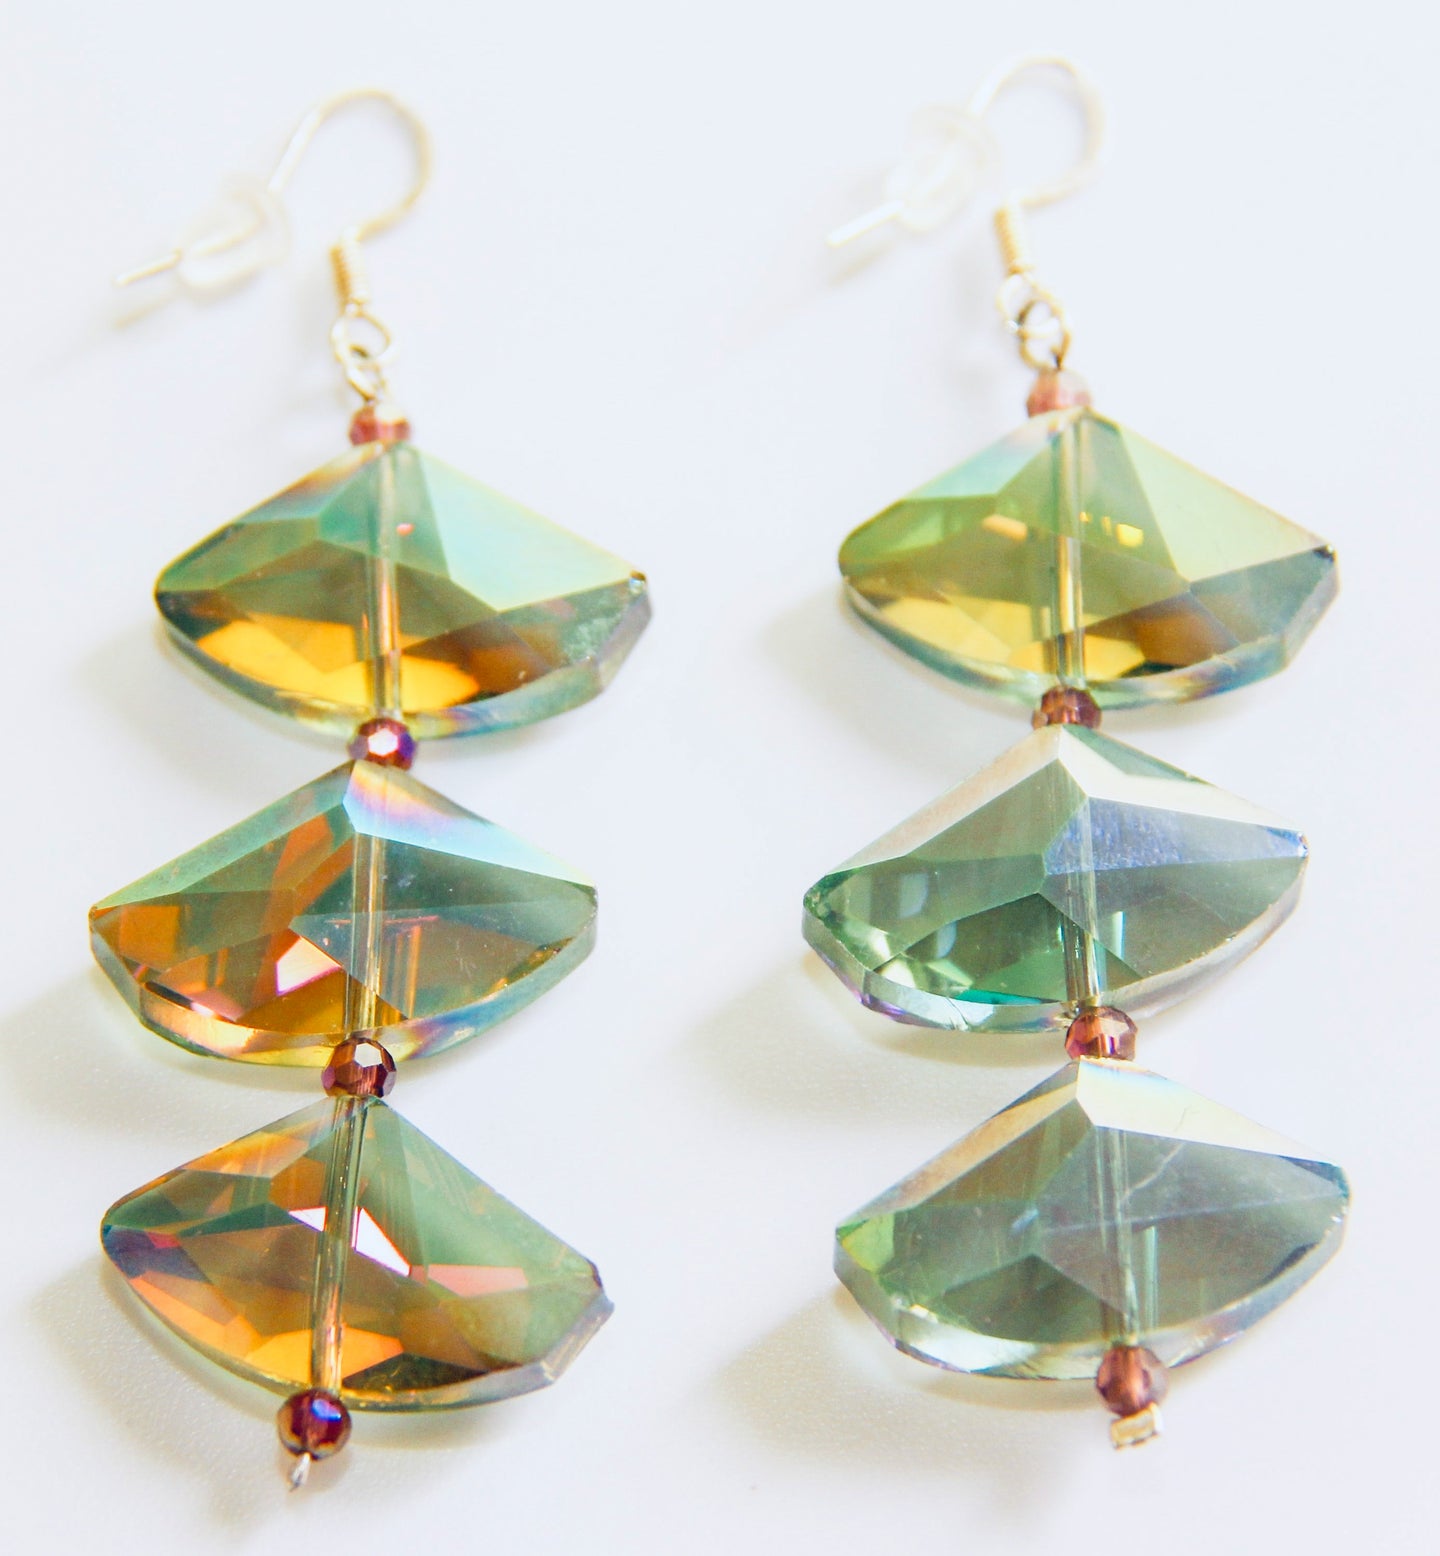 3x Geometric Diamond Faceted Shaped Blue/Green/Purple Blend Crystals Earrings